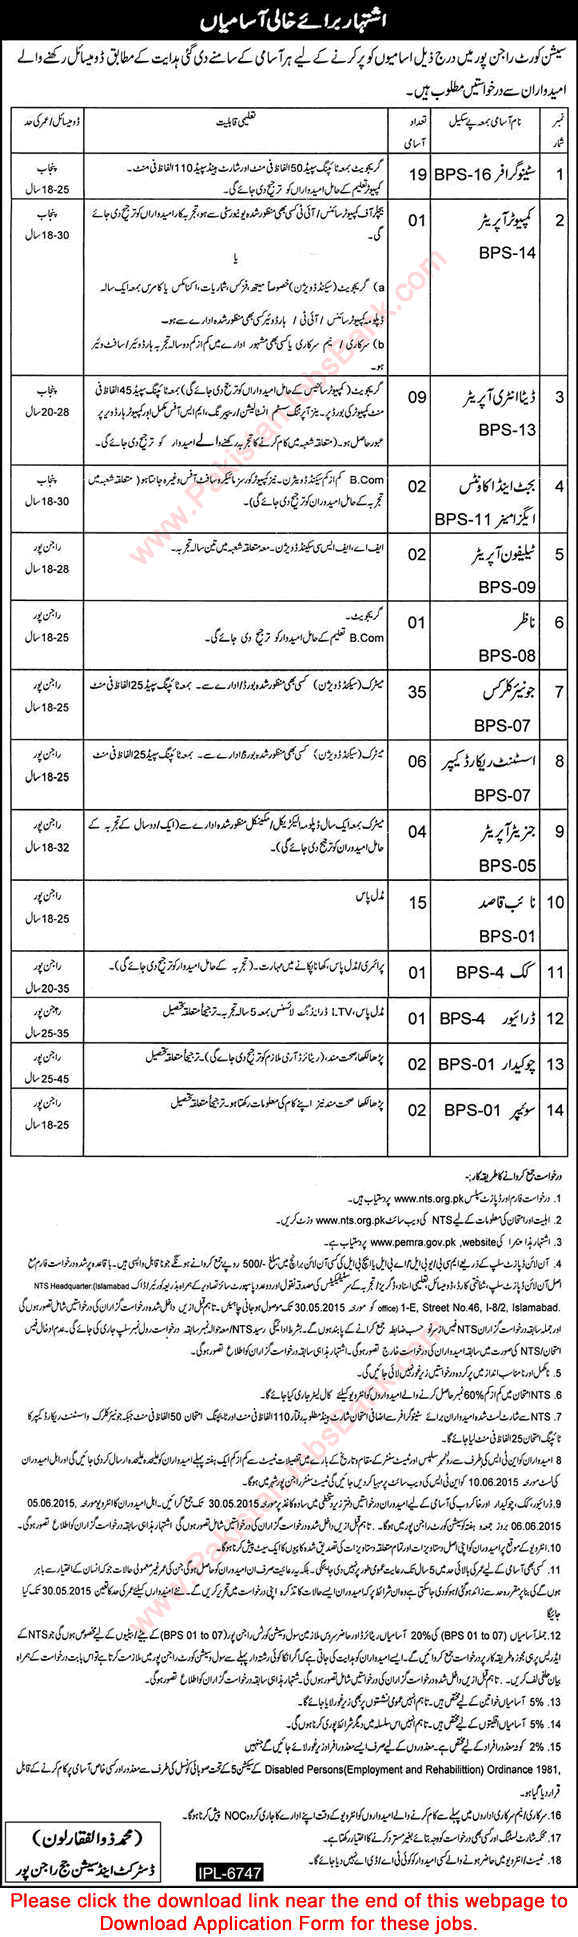 Positions Vacant in District and Session Court Rajanpur May 2015 NTS Jobs Application Form Download